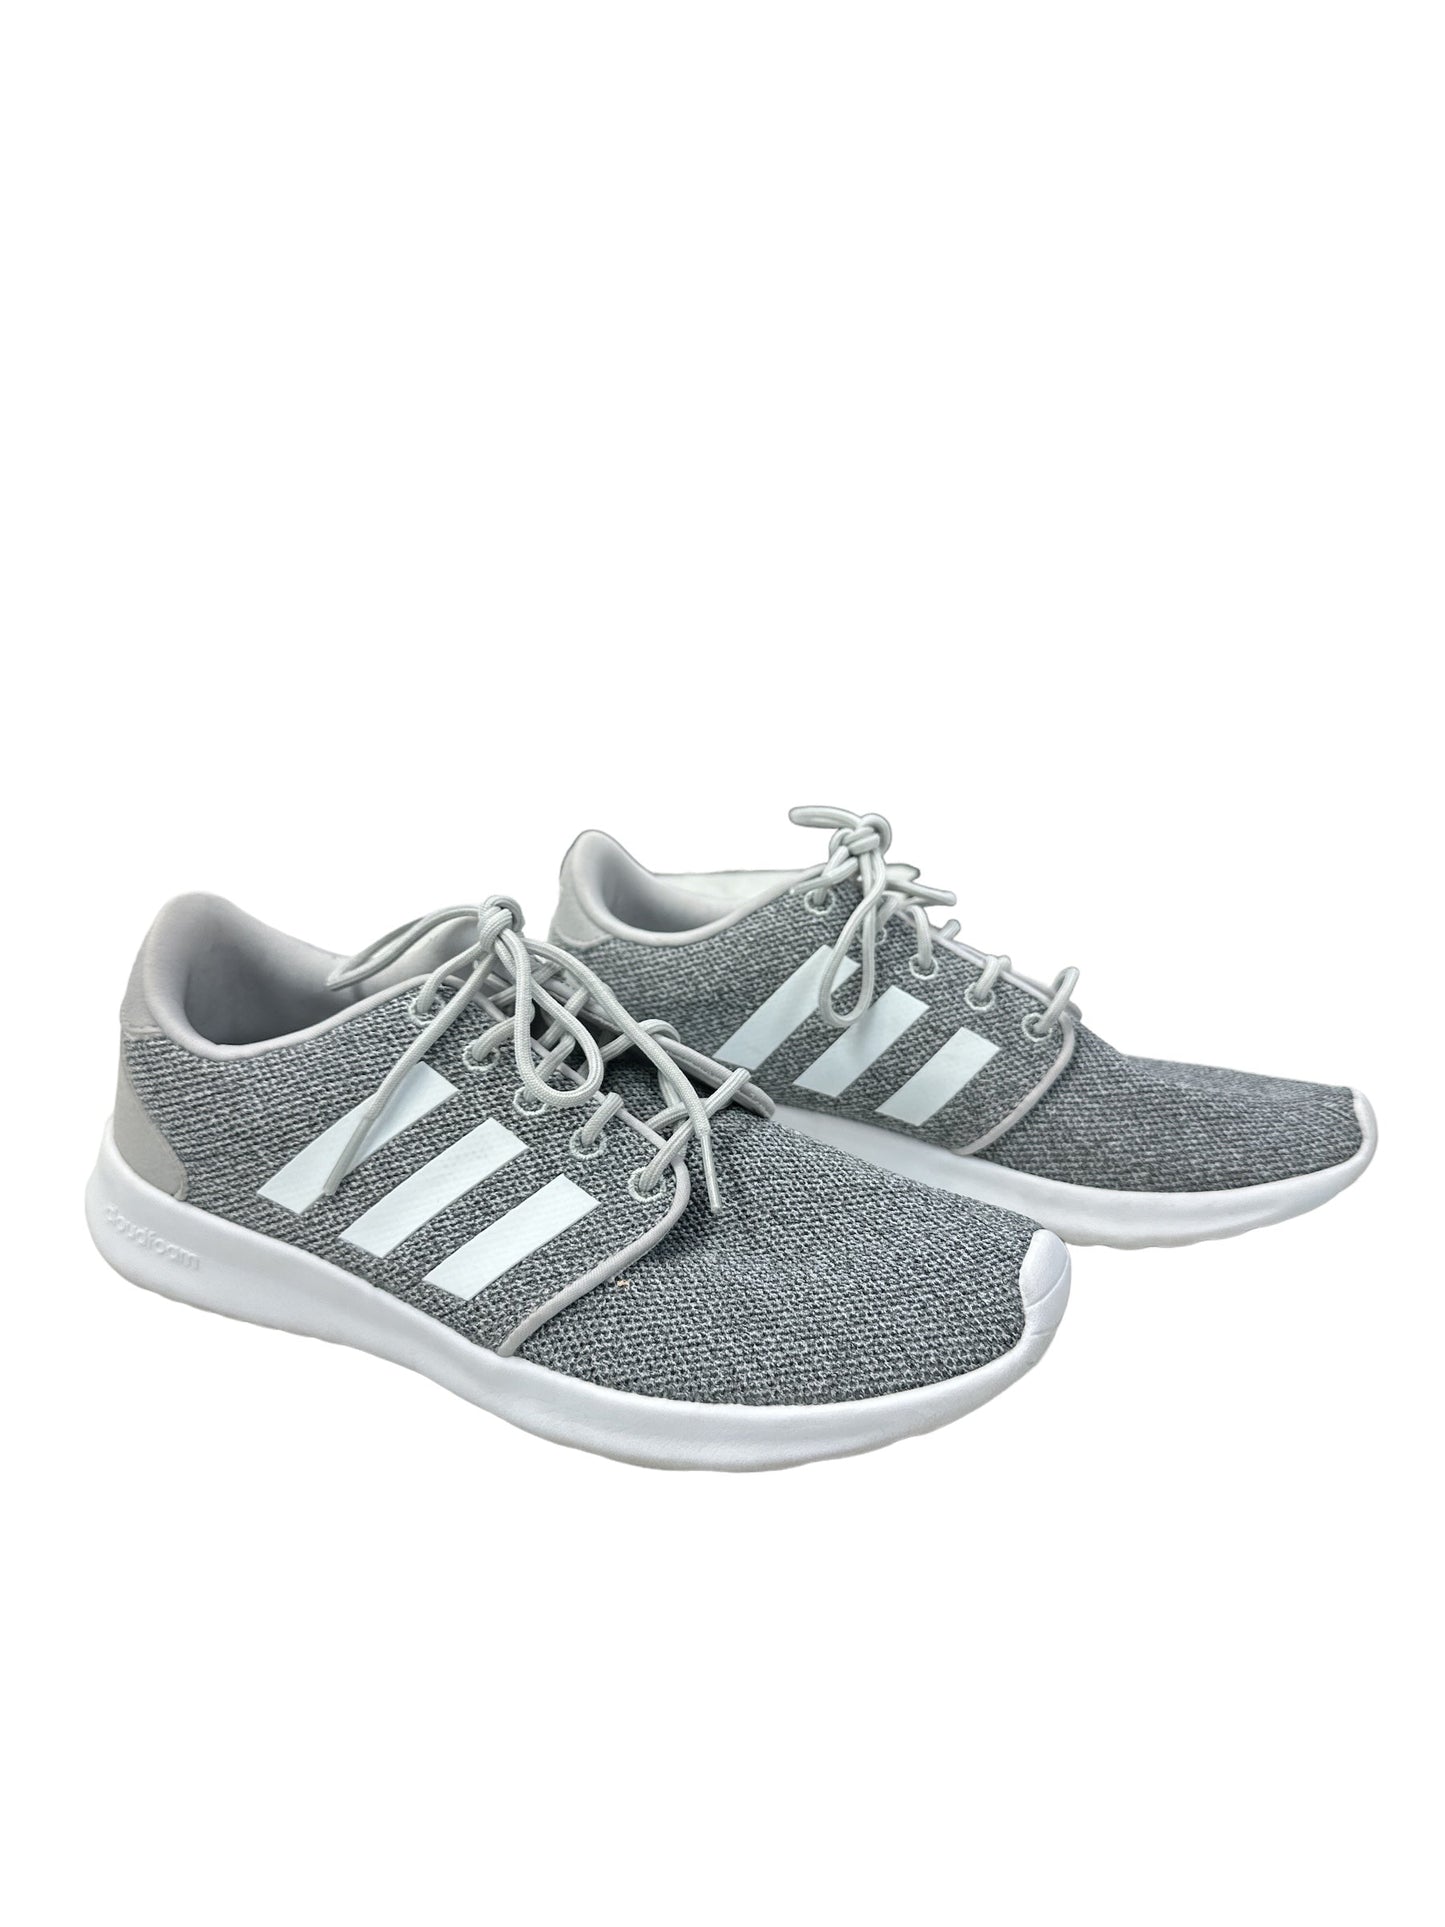 Shoes Athletic By Adidas  Size: 6.5